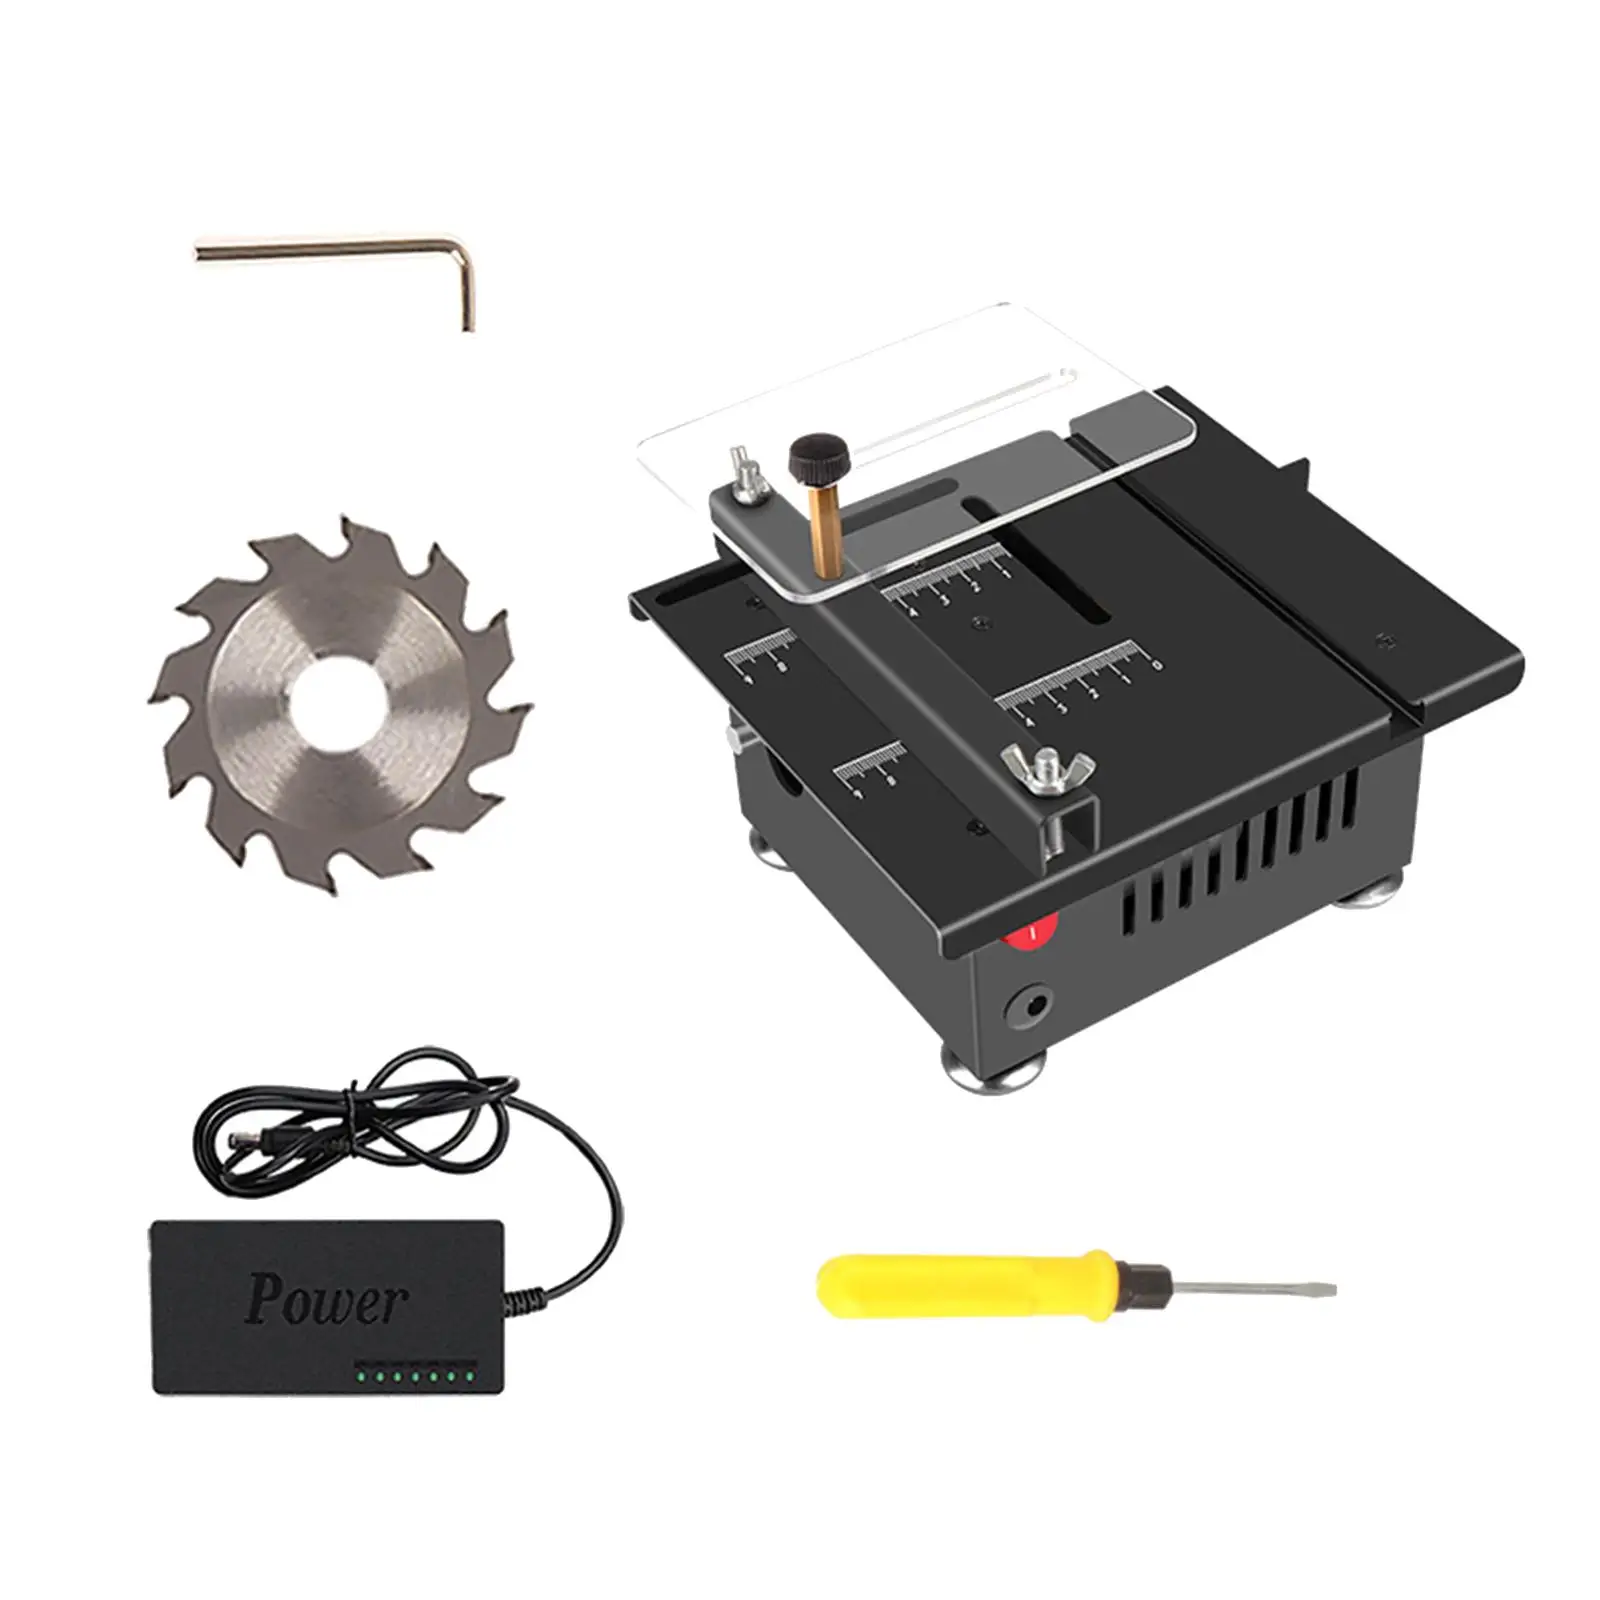 Mini Table Saw Portable Tabletop Saw for Wood Cutting DIY Crafts Wooden Craft Workshop Small Woodworking Projects US Adapter